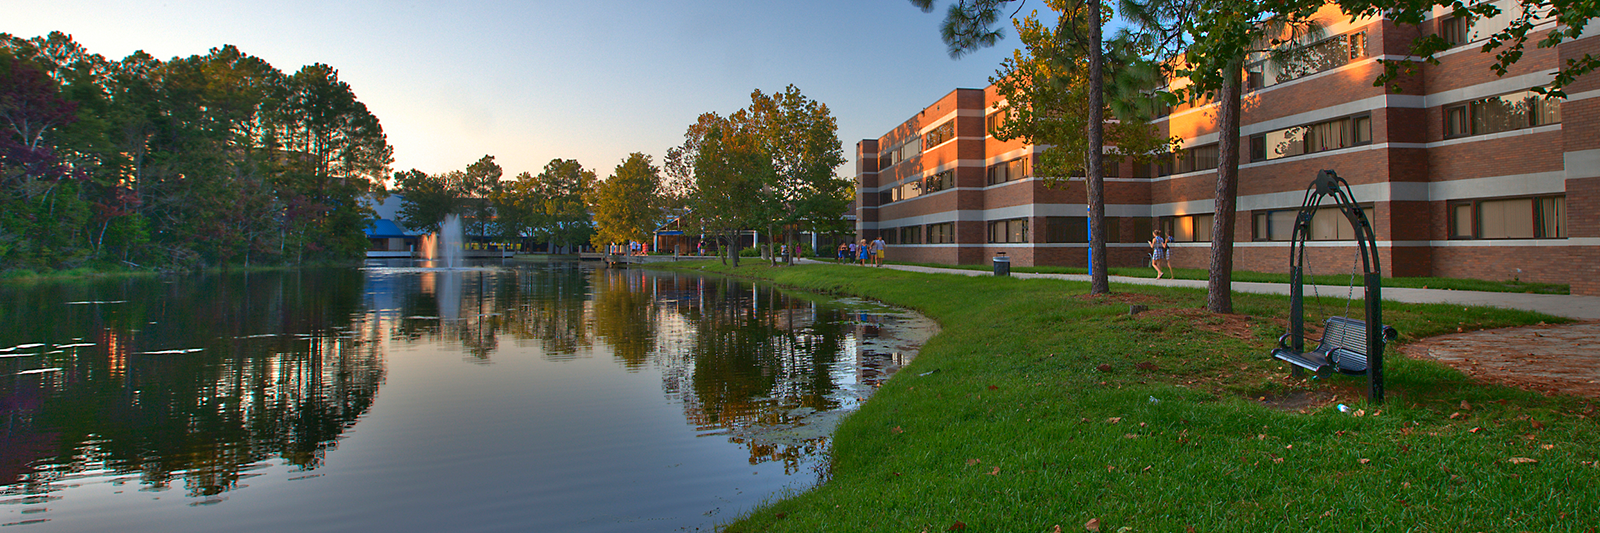 students walking along pond outside a residence hall